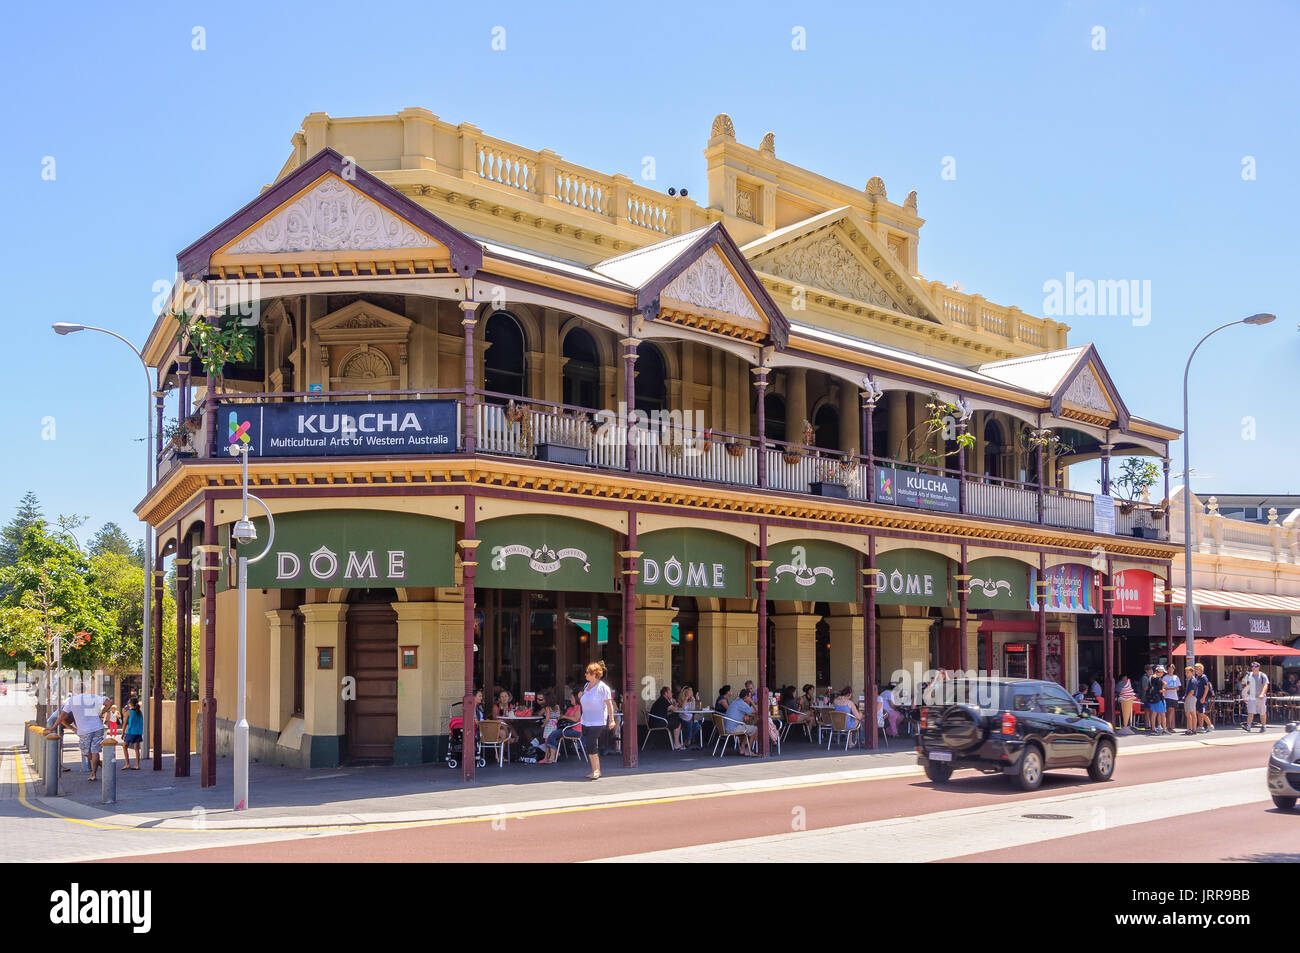 The Evan Davies Building was first opened in 15 March 1899 as the Literary Institute - Fremantle, WA, Australia Stock Photo